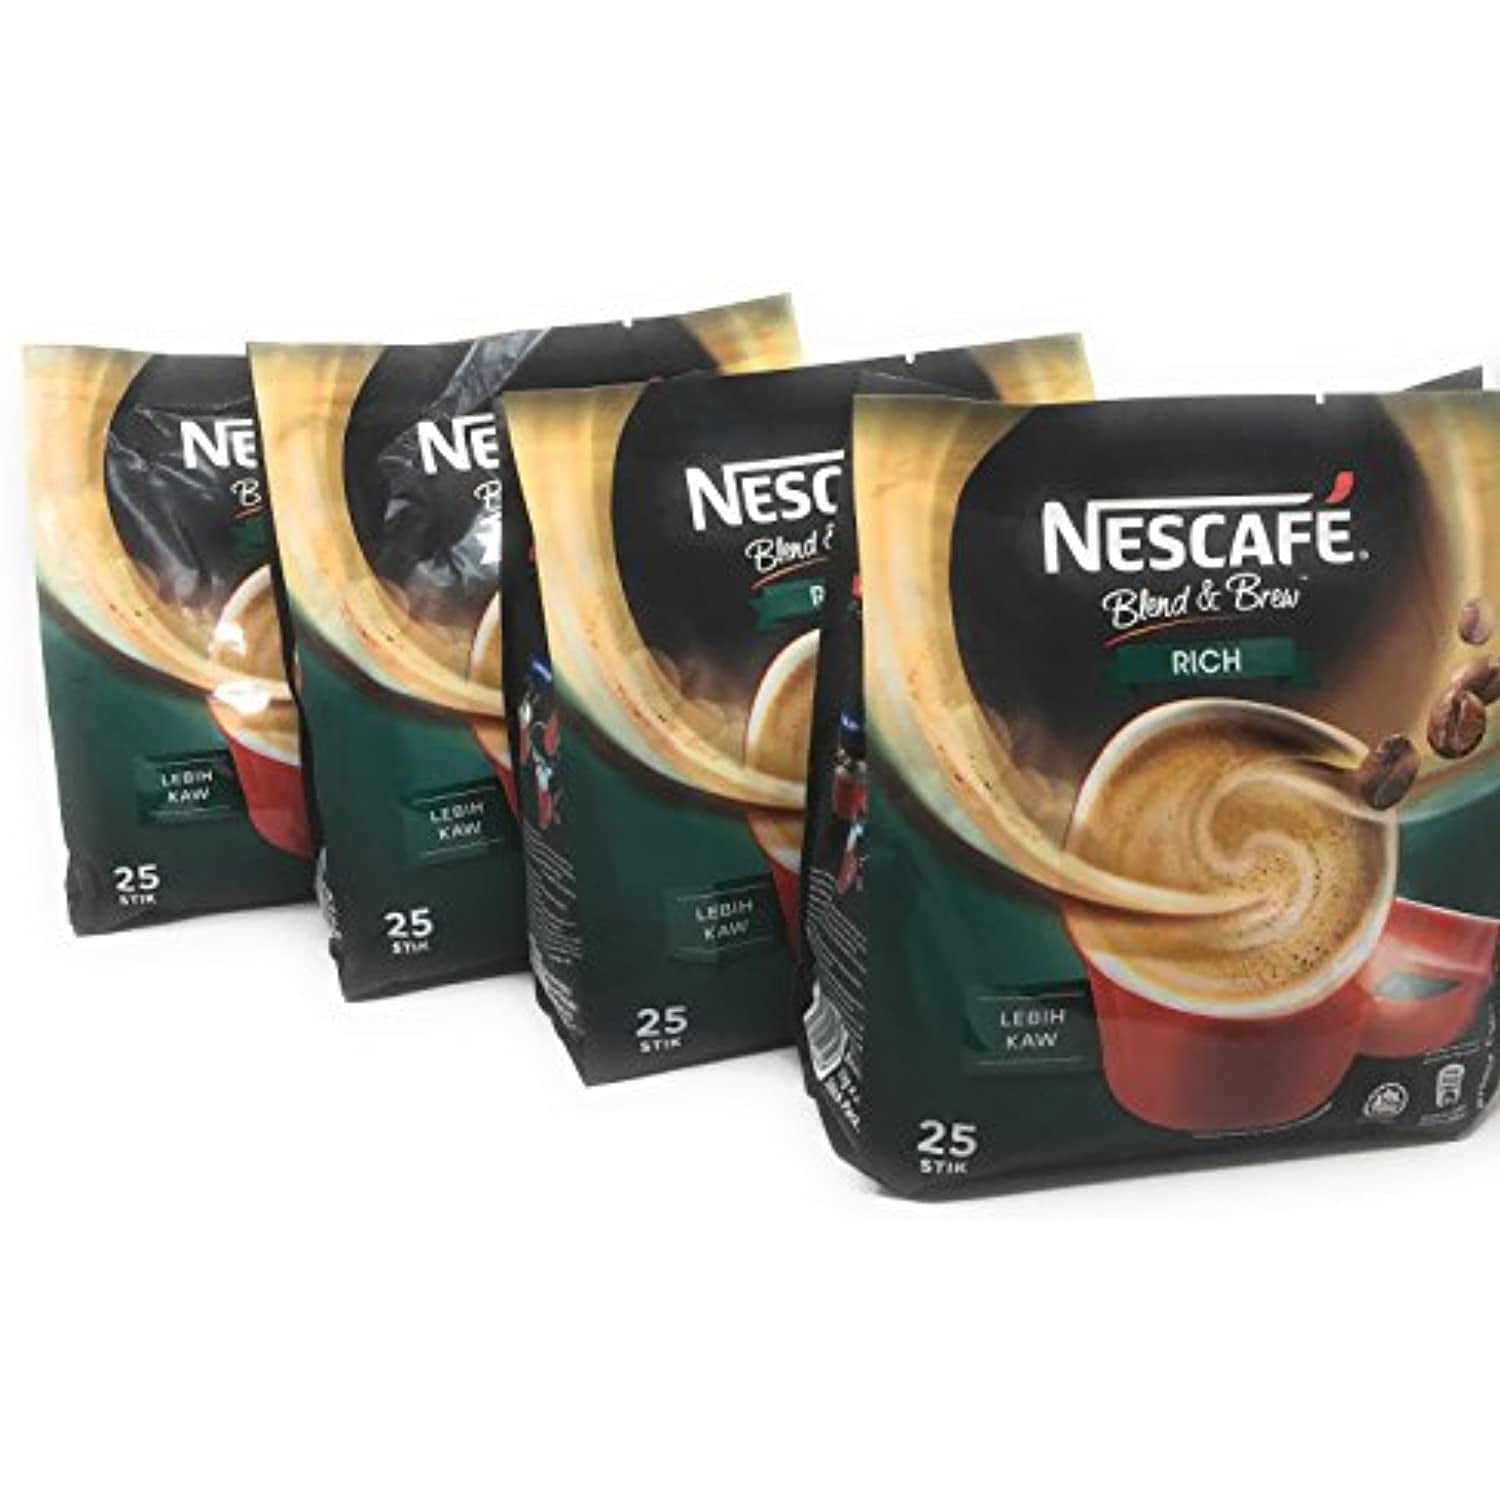  2 PACK - Nescafé 3 in 1 RICH Instant Coffee (50 Sticks TOTAL)  Made from Premium Quality Beans Offers a Relaxing Flavor But with Strong,  Solid Essence and Aroma Has a